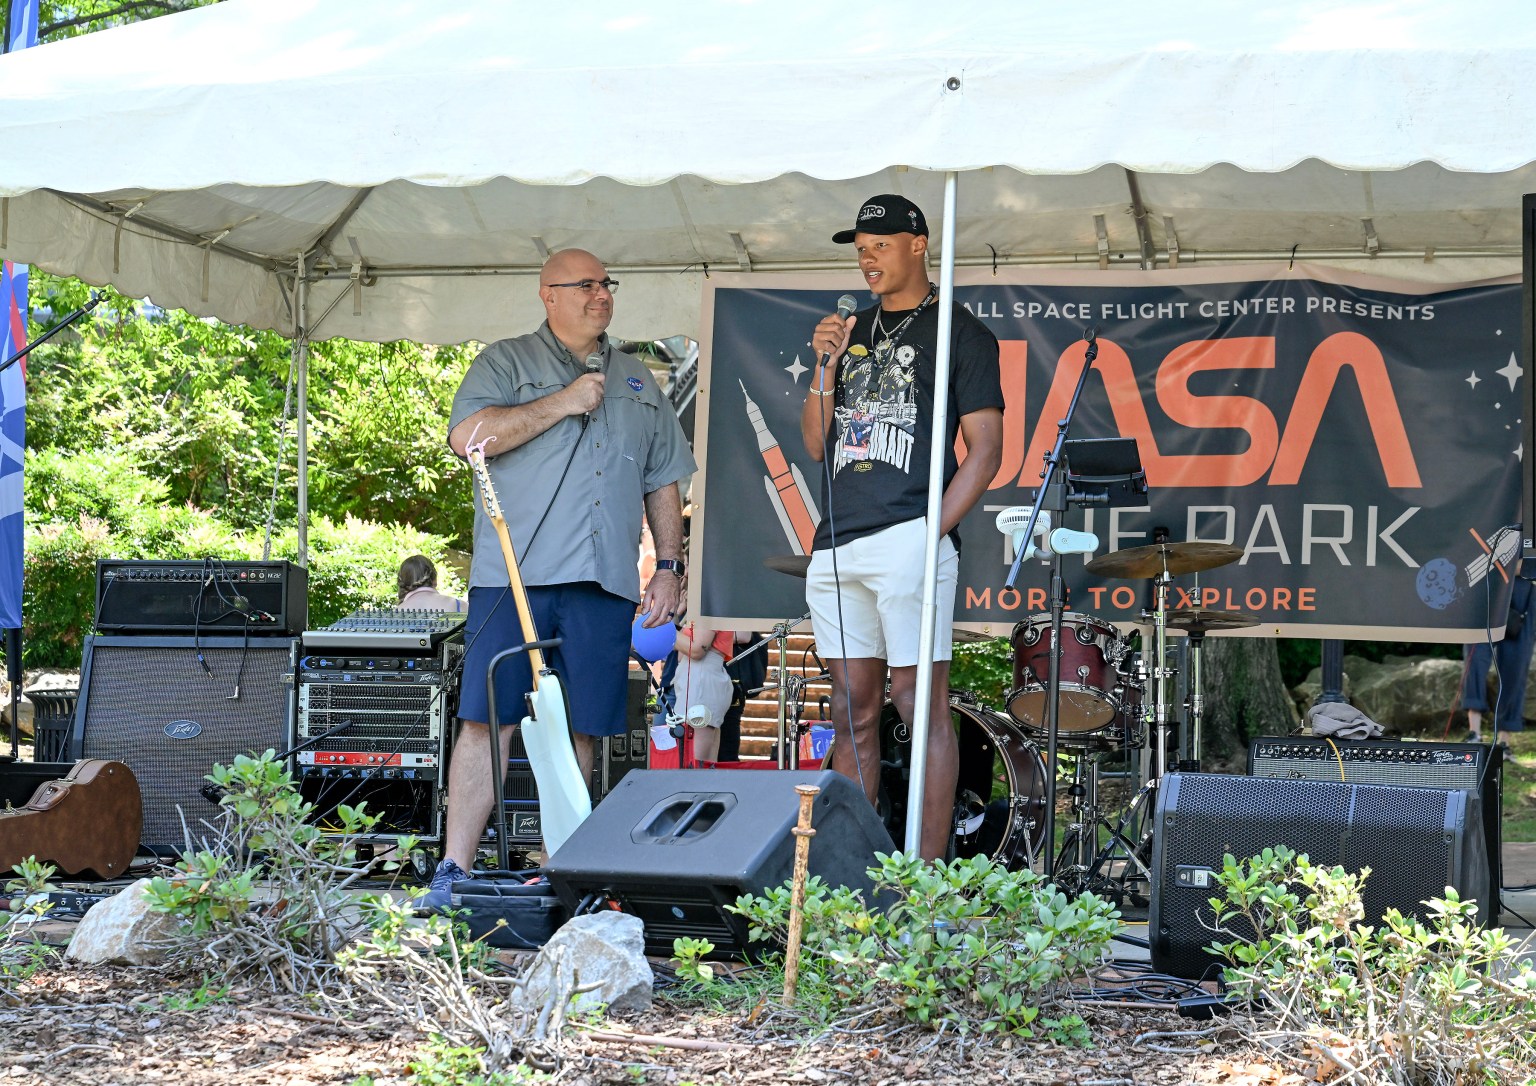 Marshall Director Joseph Pelfrey, left, interviews NFL quarterback Joshua Dobbs at NASA in the Park. In addition to his football career, Dobbs has an aerospace engineering degree and is engaged in STEM outreach through his foundation, ASTROrdinary.